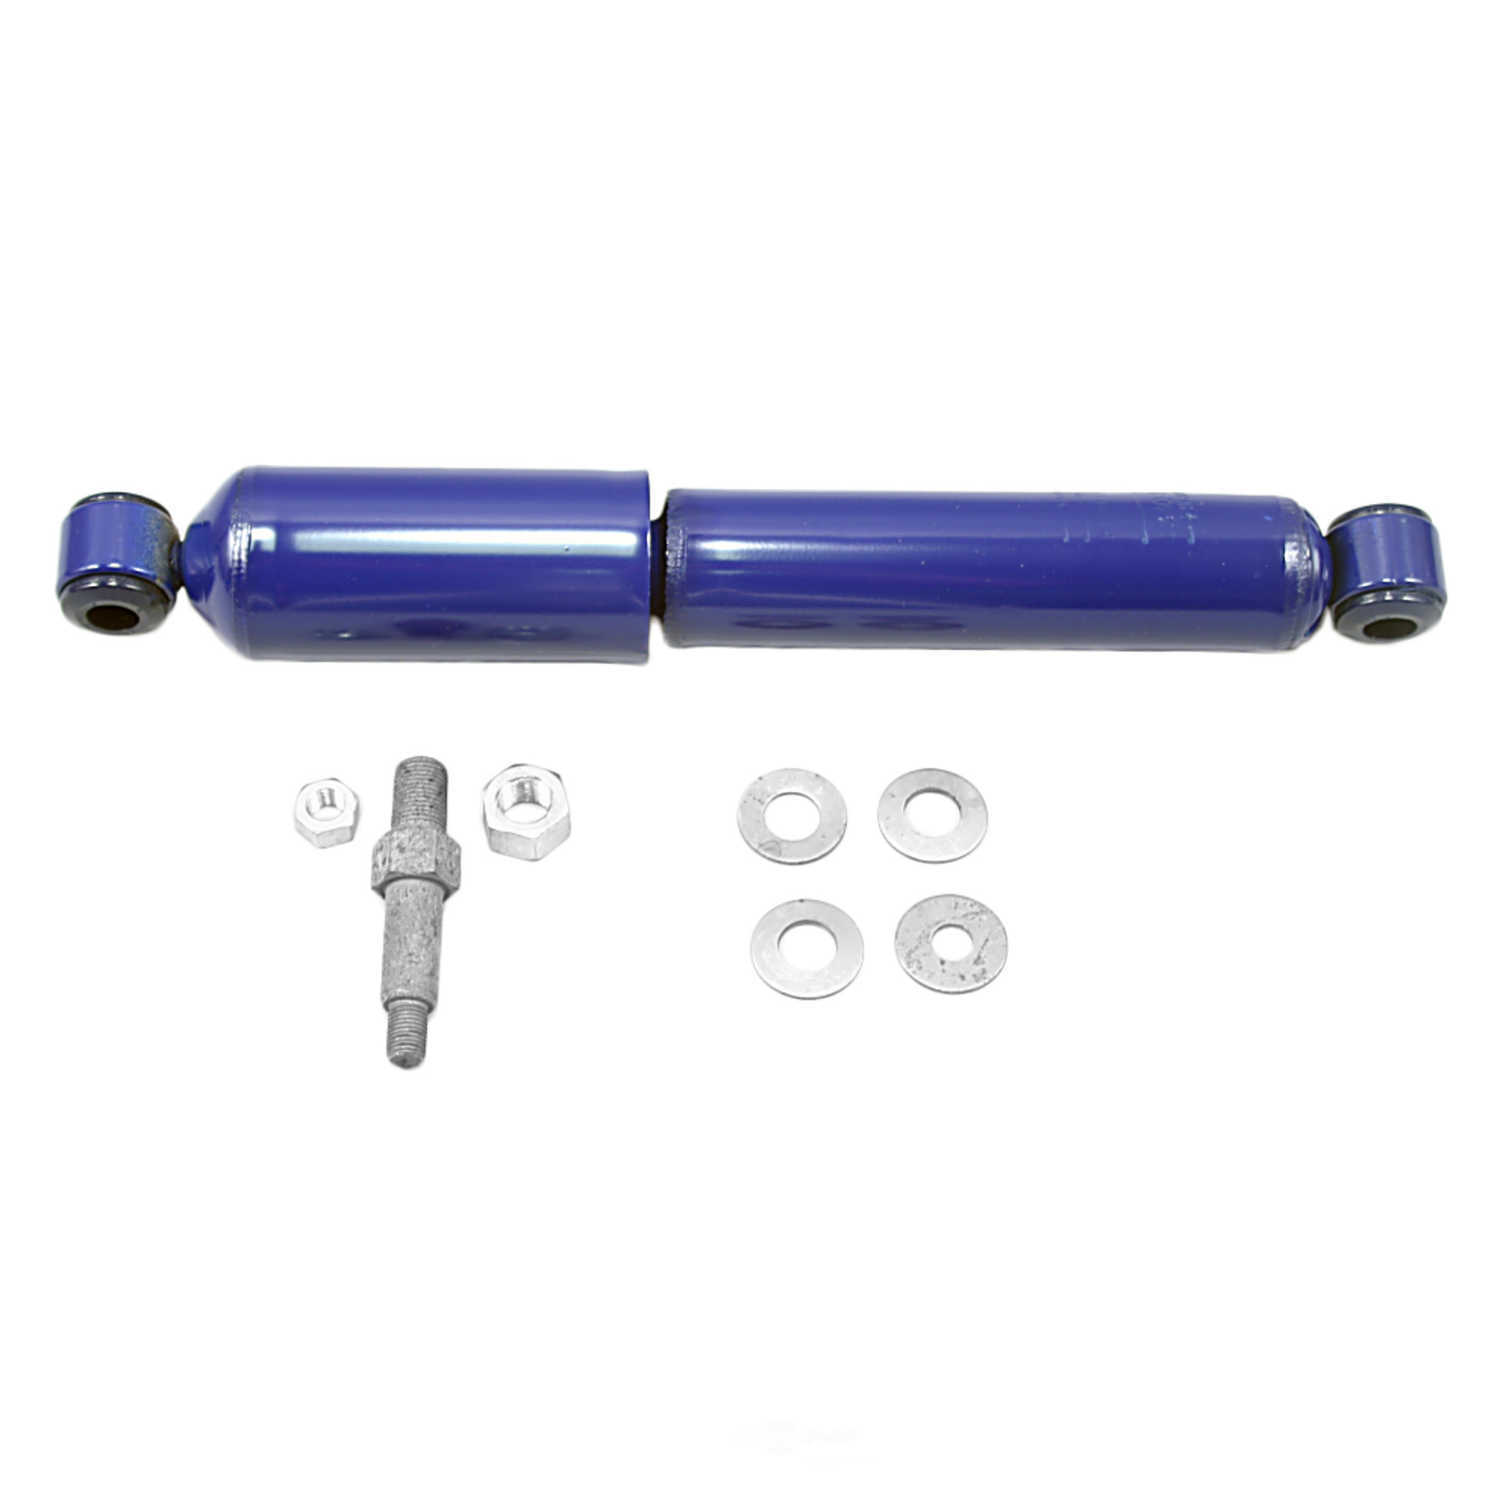 MONROE SHOCKS/STRUTS - Monro-Matic Plus Shock Absorber (With ABS Brakes, Front) - MOE 33033